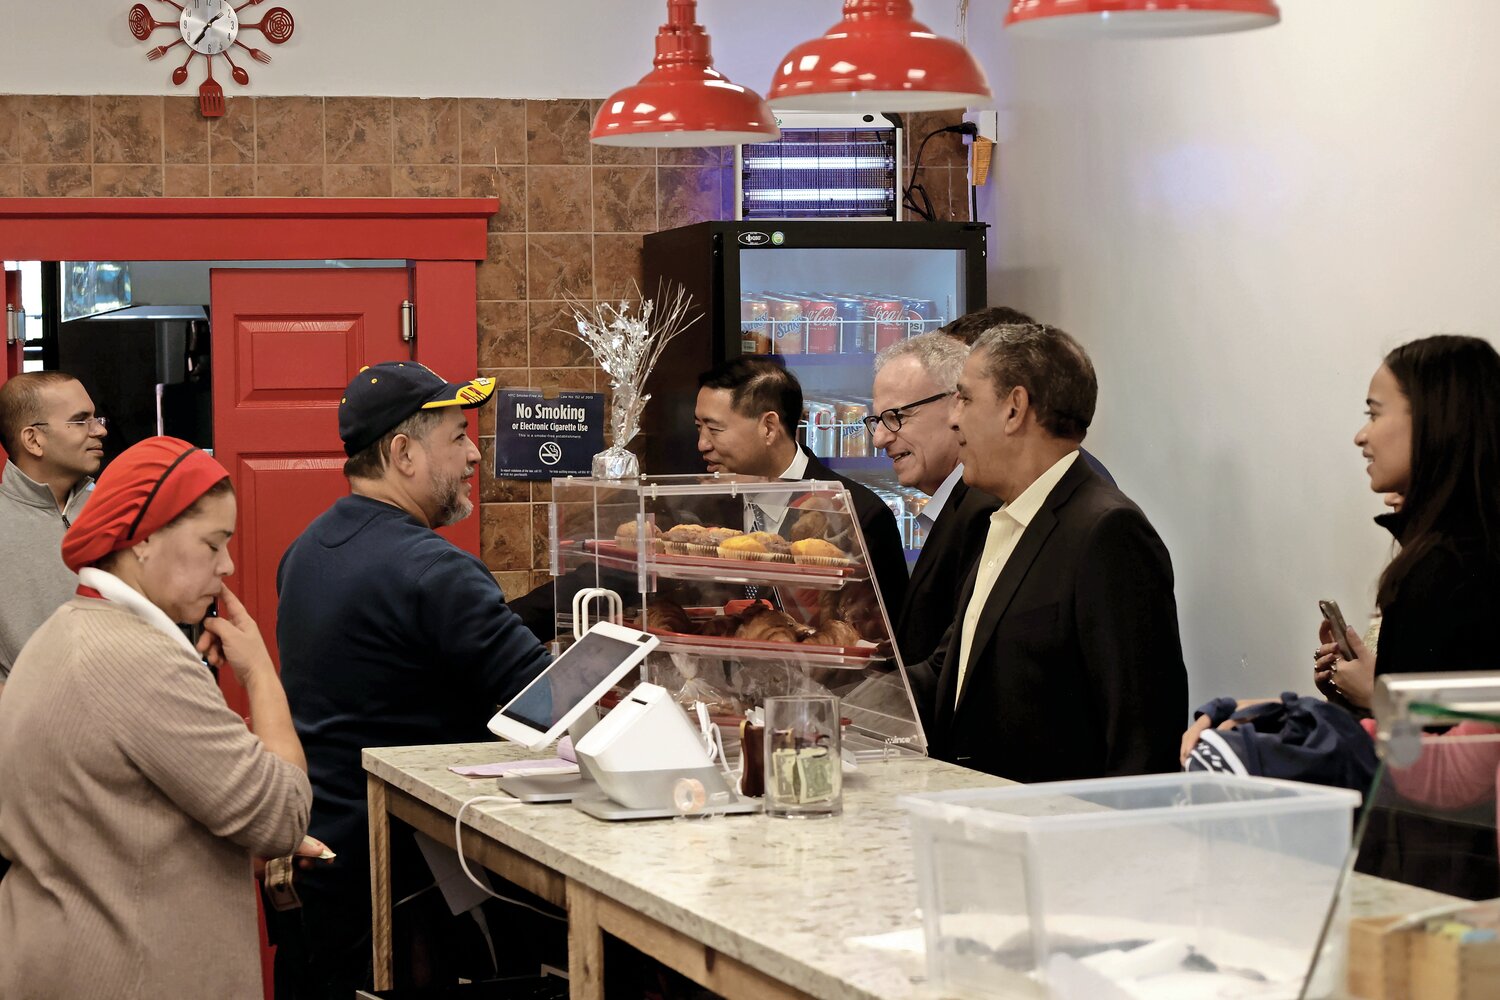 One of the small business stops for the electeds and the small business services commissioner Kevin Kim was My Kitchen Flavor. The business has been in operation for about four months and sells Dominican food.